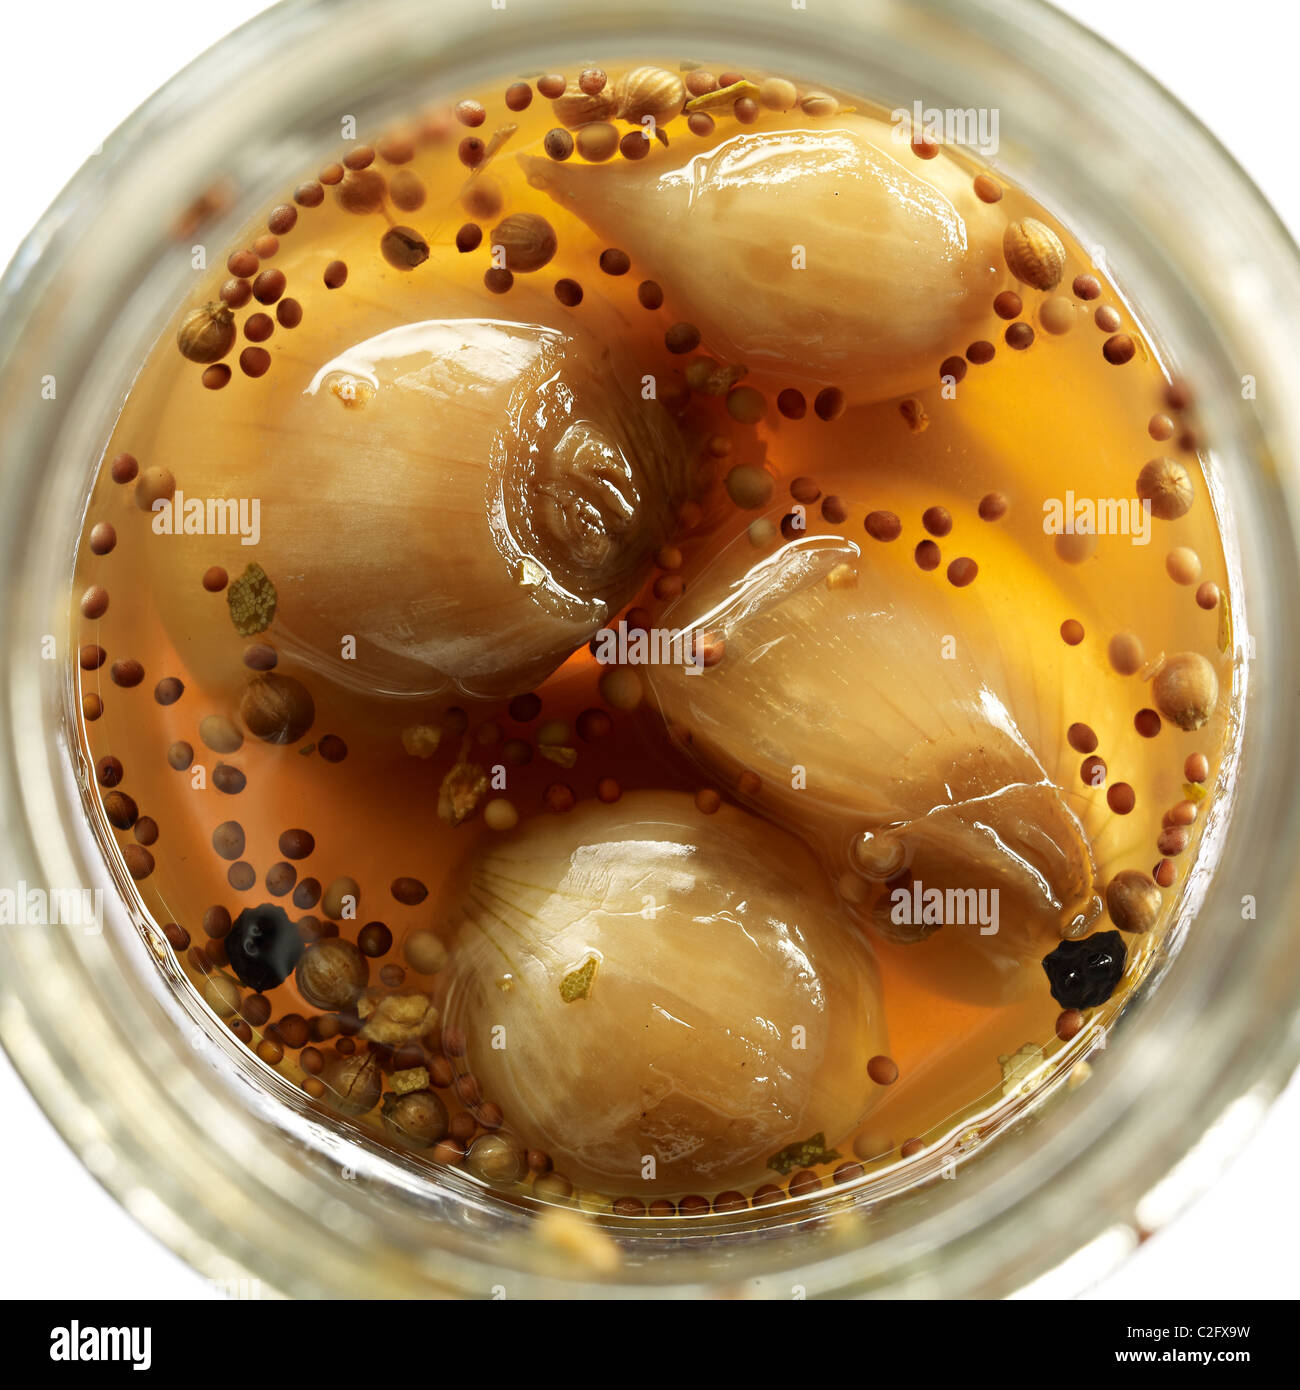 pickles preserved vegetable shallots Stock Photo